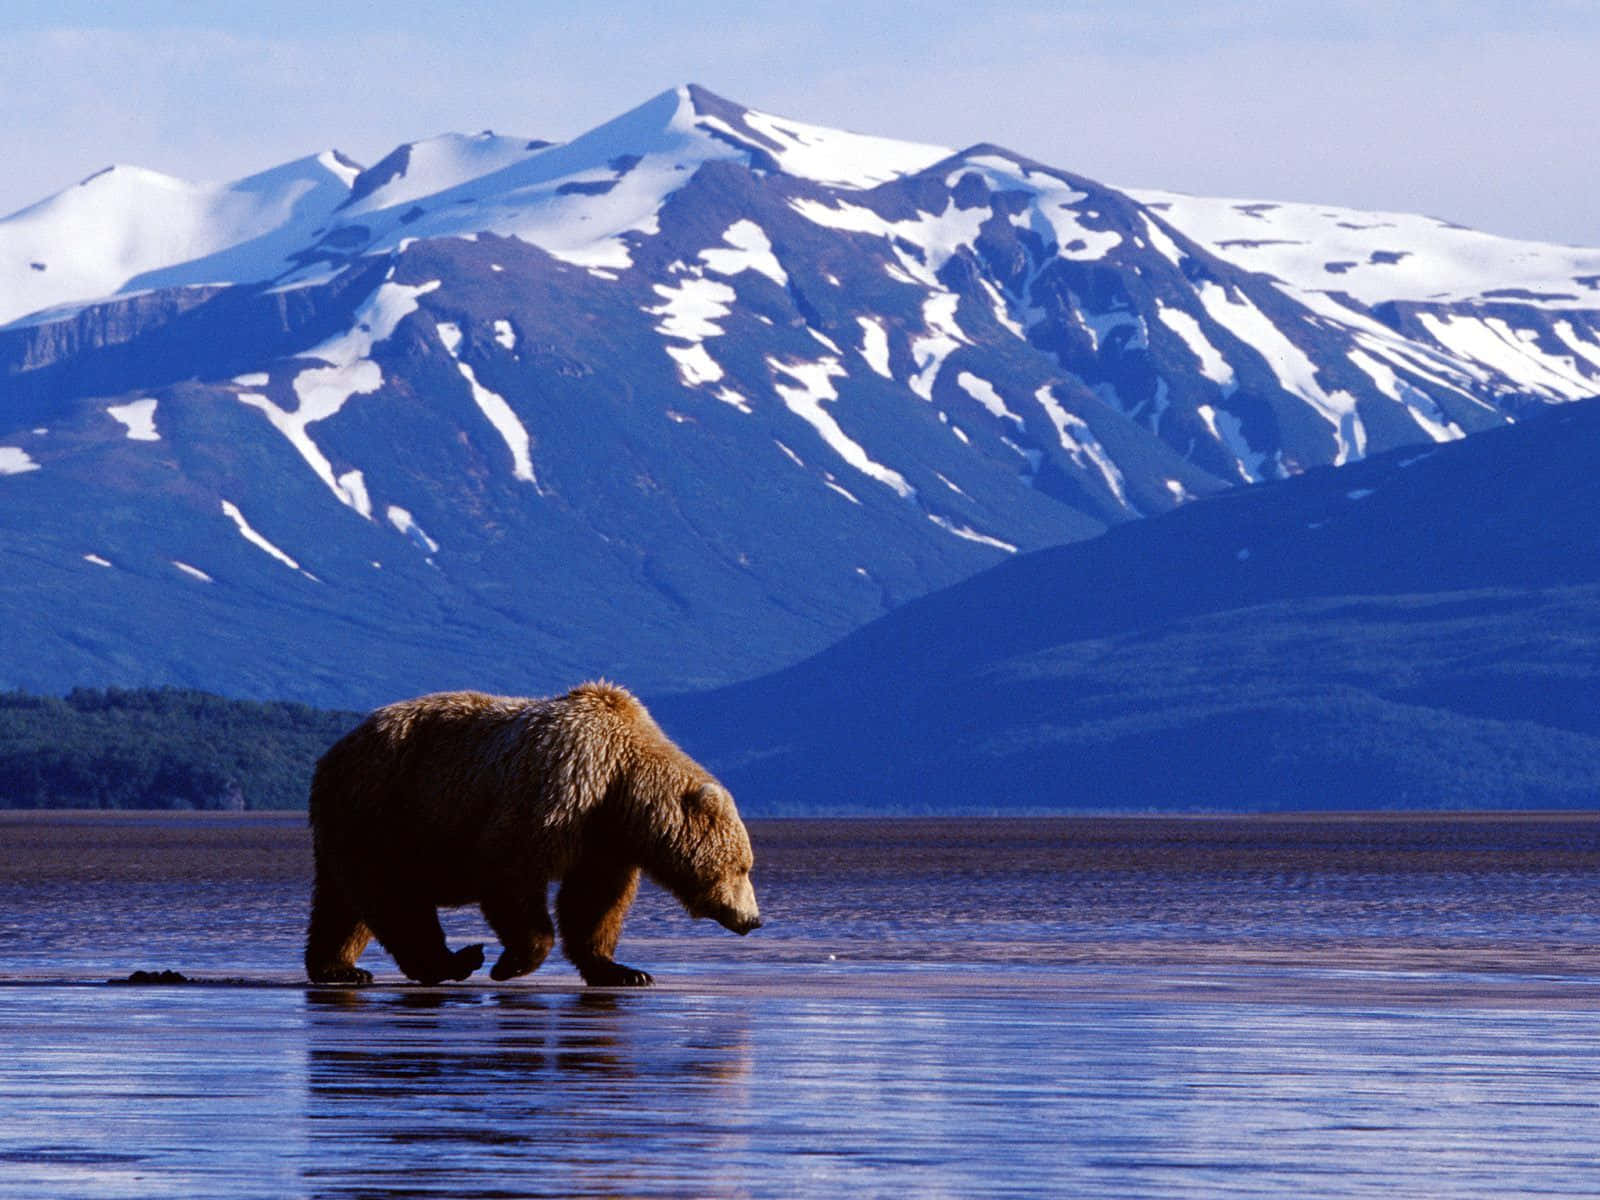 Grizzly Bear Walkingin Waterwith Mountain Backdrop Background